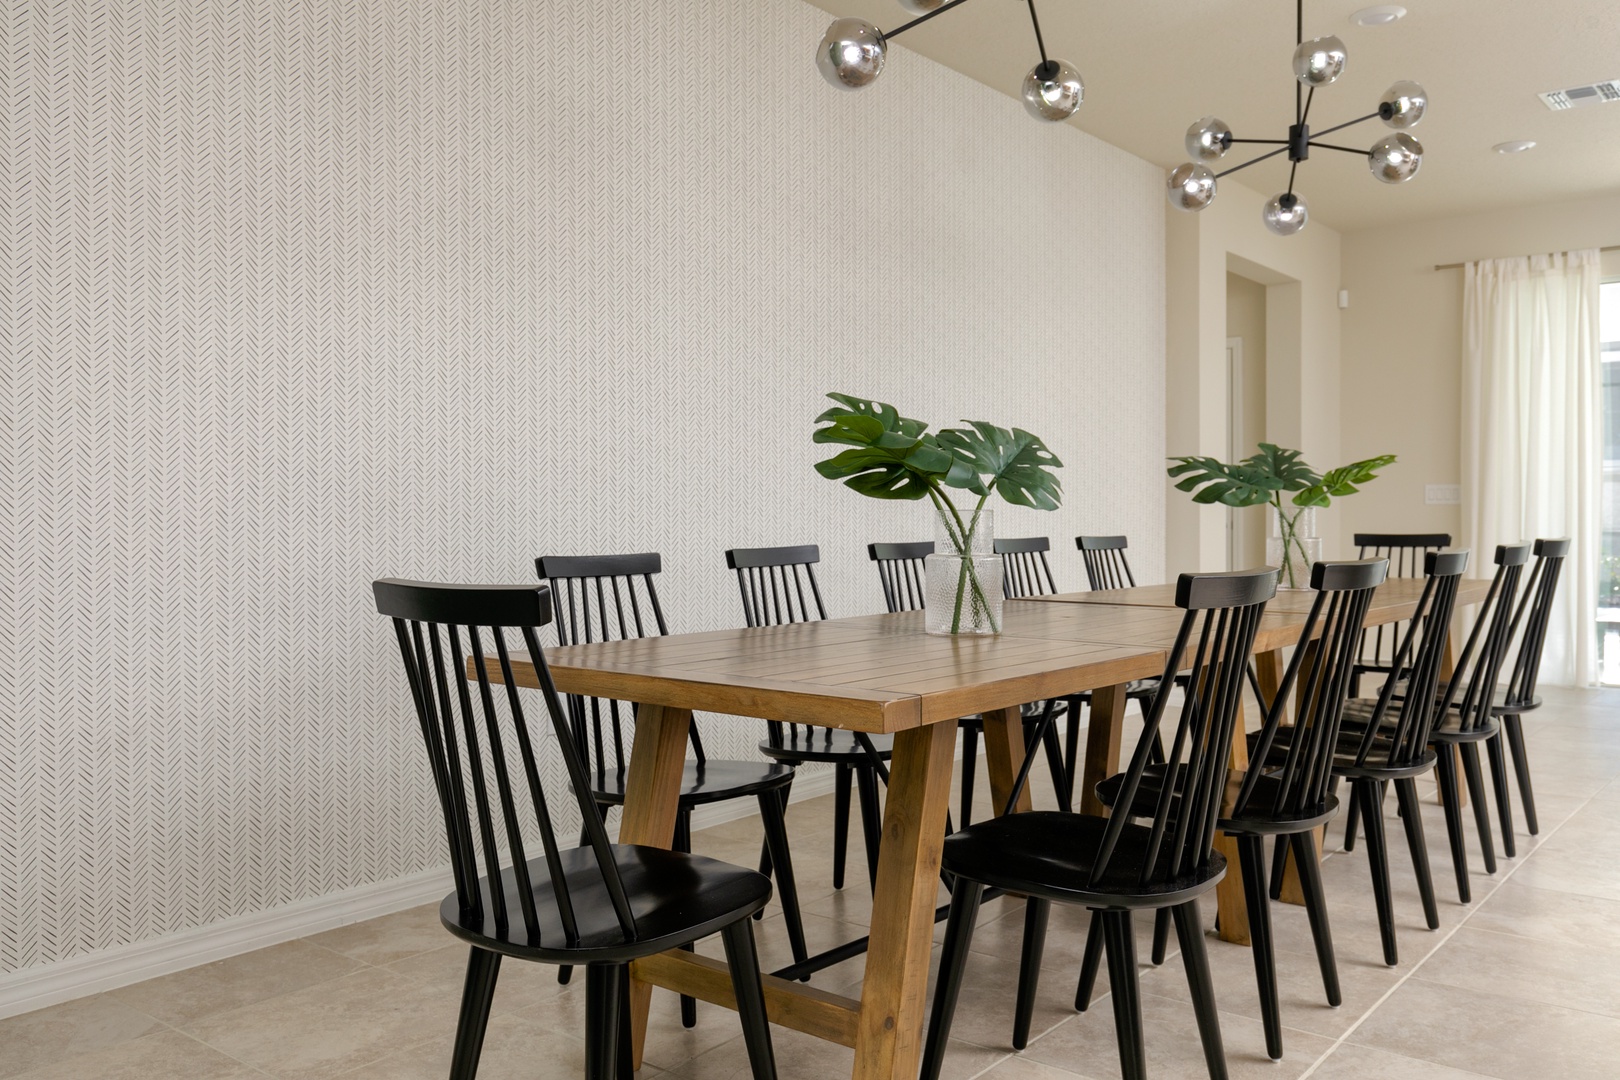 Gather for meals together at the chic dining table, offering seating for 12